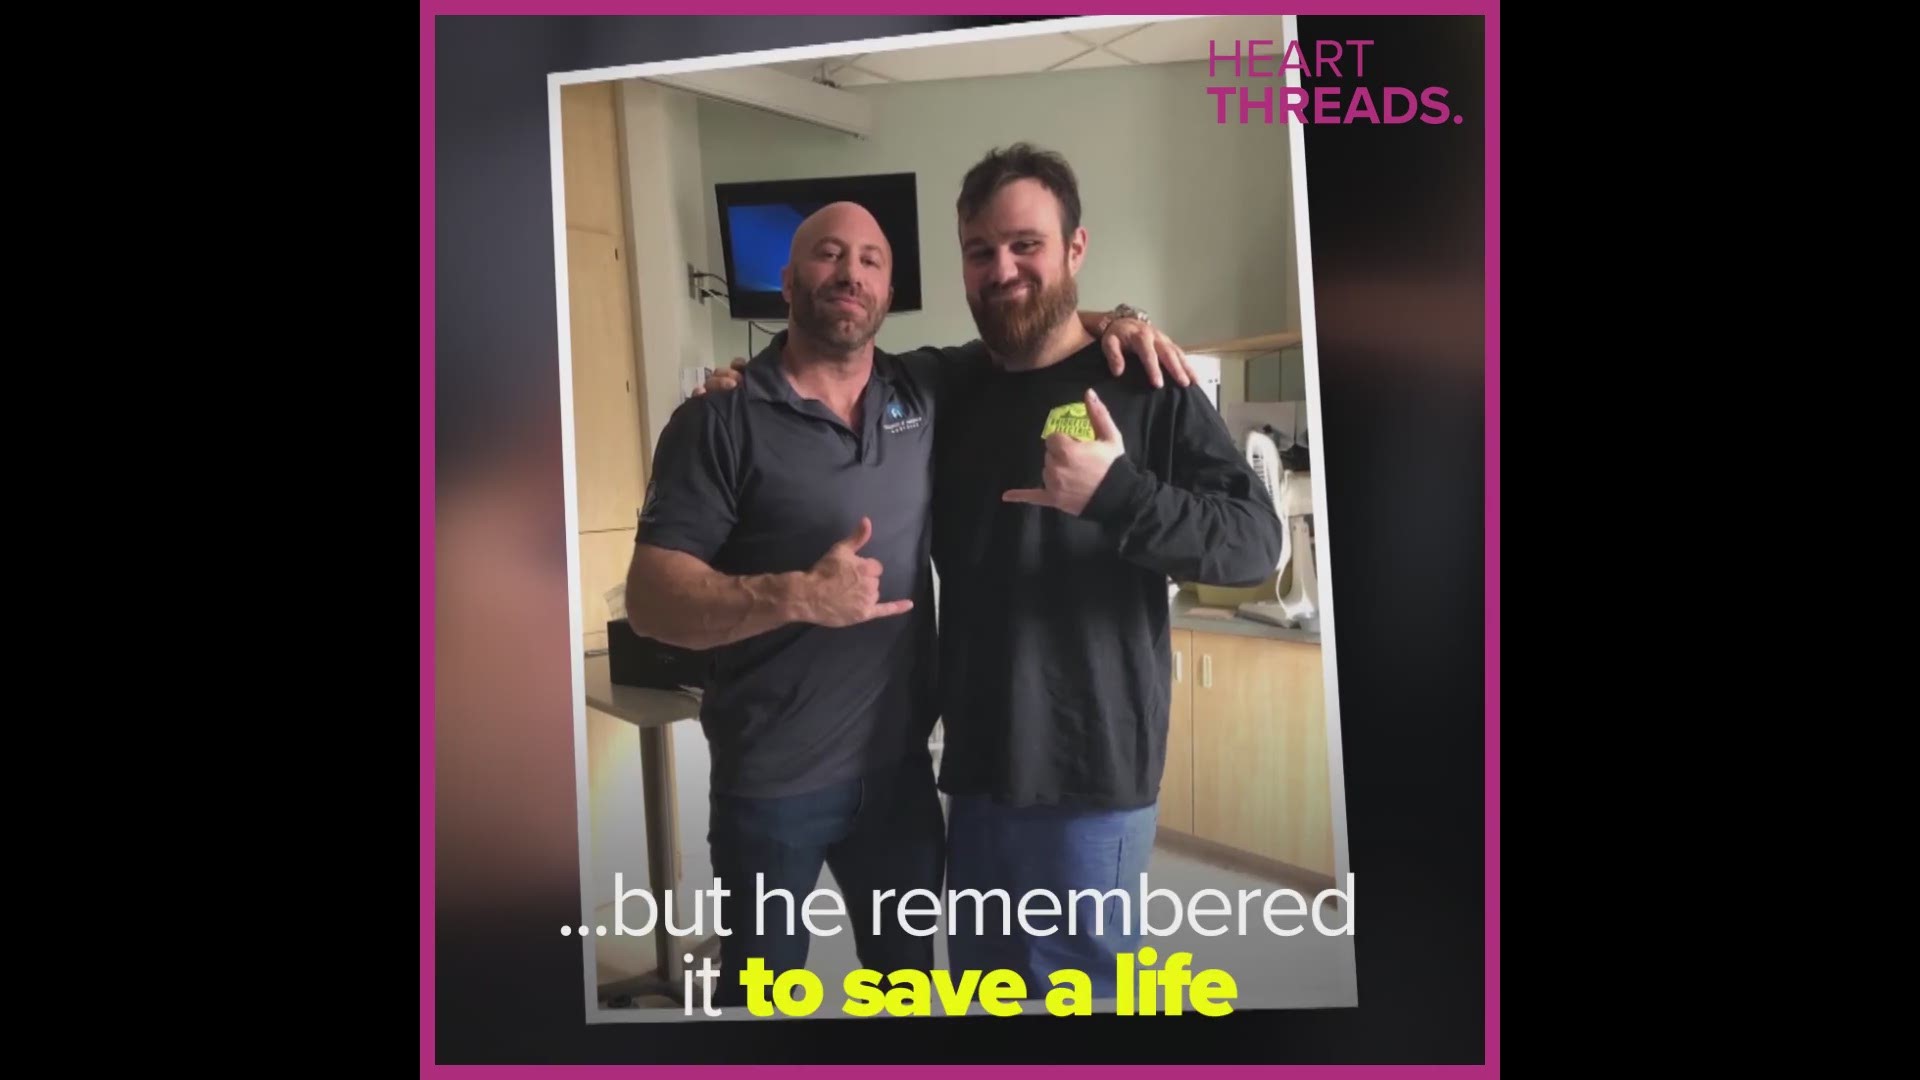 He learned CPR as a firefighter in the Marine Corps, but never used it. 22 years later, he used his training to save a young father.